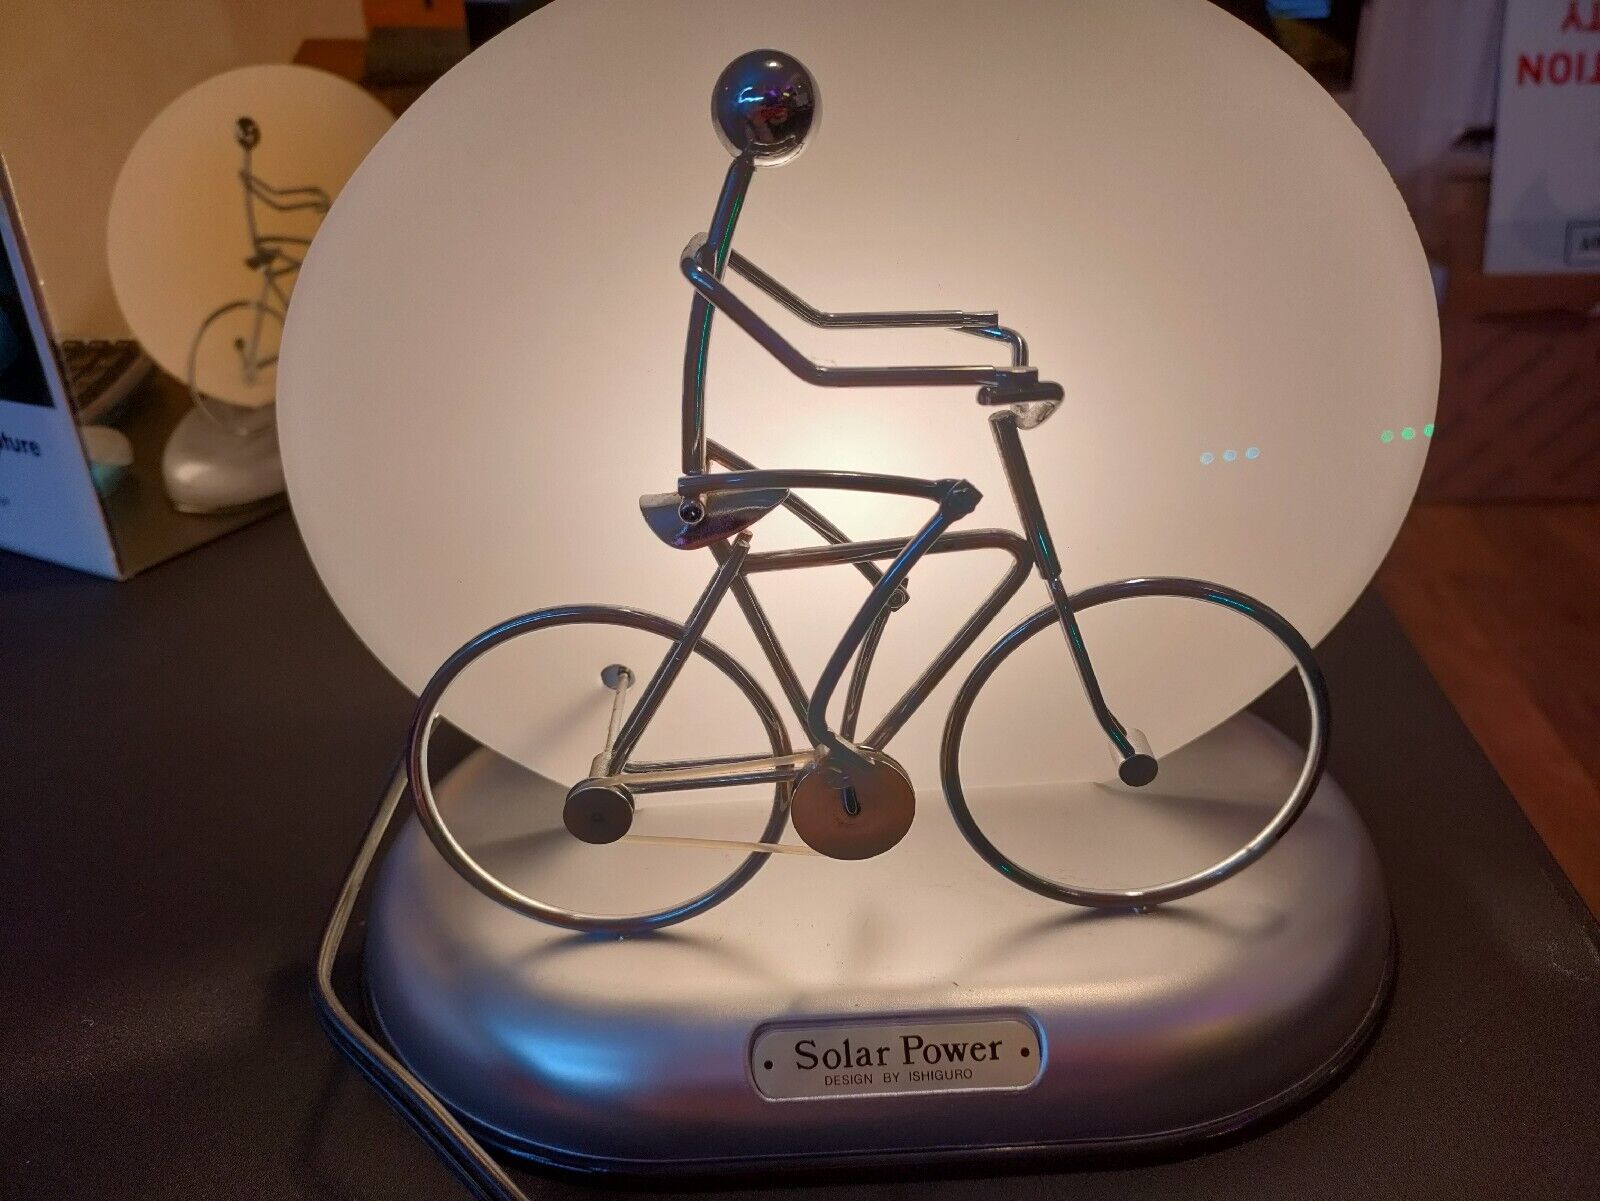 Vintage Solar Power by Ishiguro - Motion Man Pedaling Bicycle Table Lamp